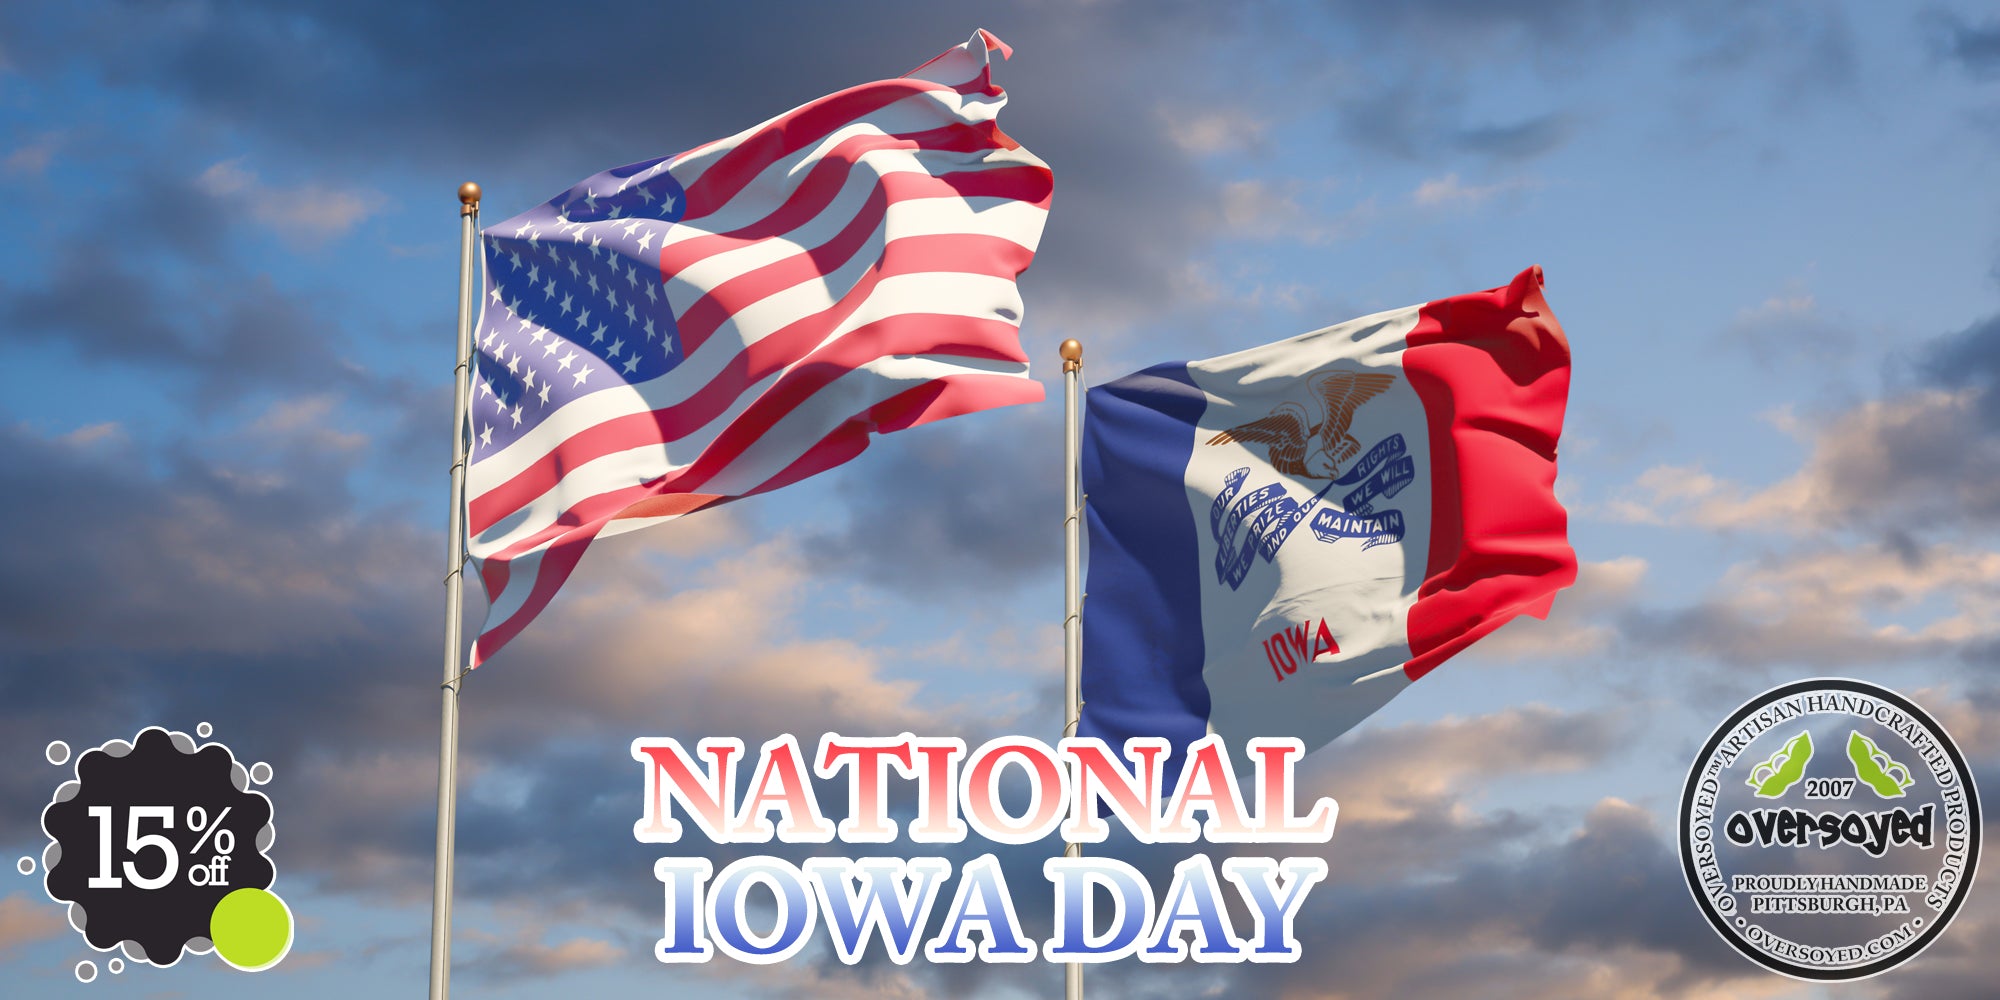 OverSoyed Artisan Handcrafted Products - National Iowa Day